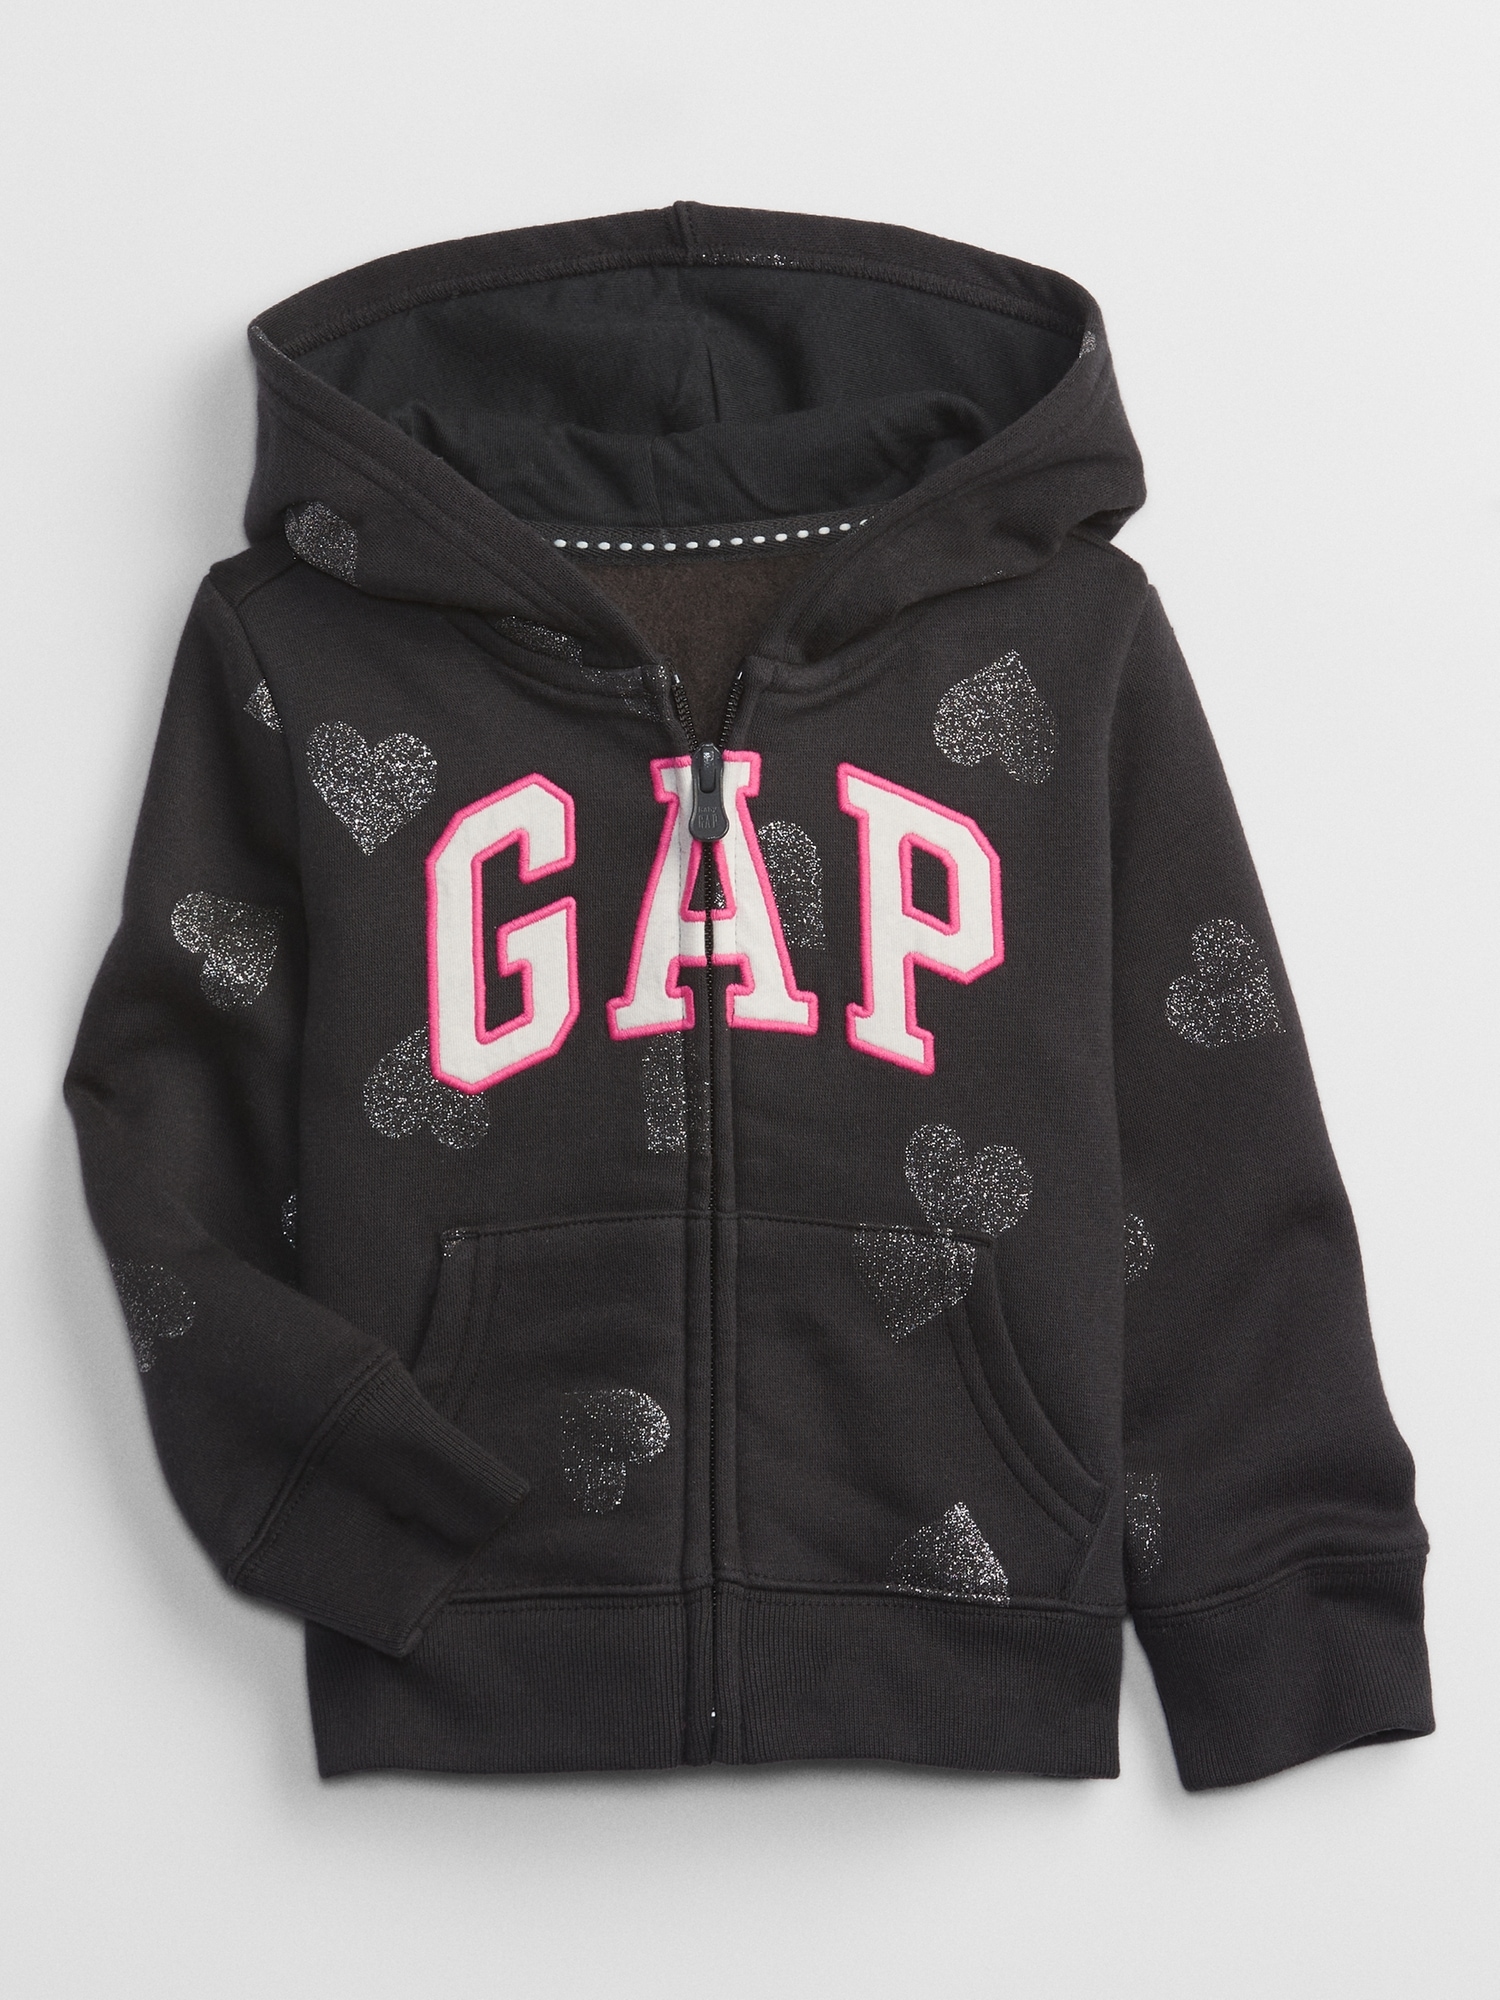 Gap Factory Friends & Family Sale: Extra 50% off + 10% off + Free Shipping